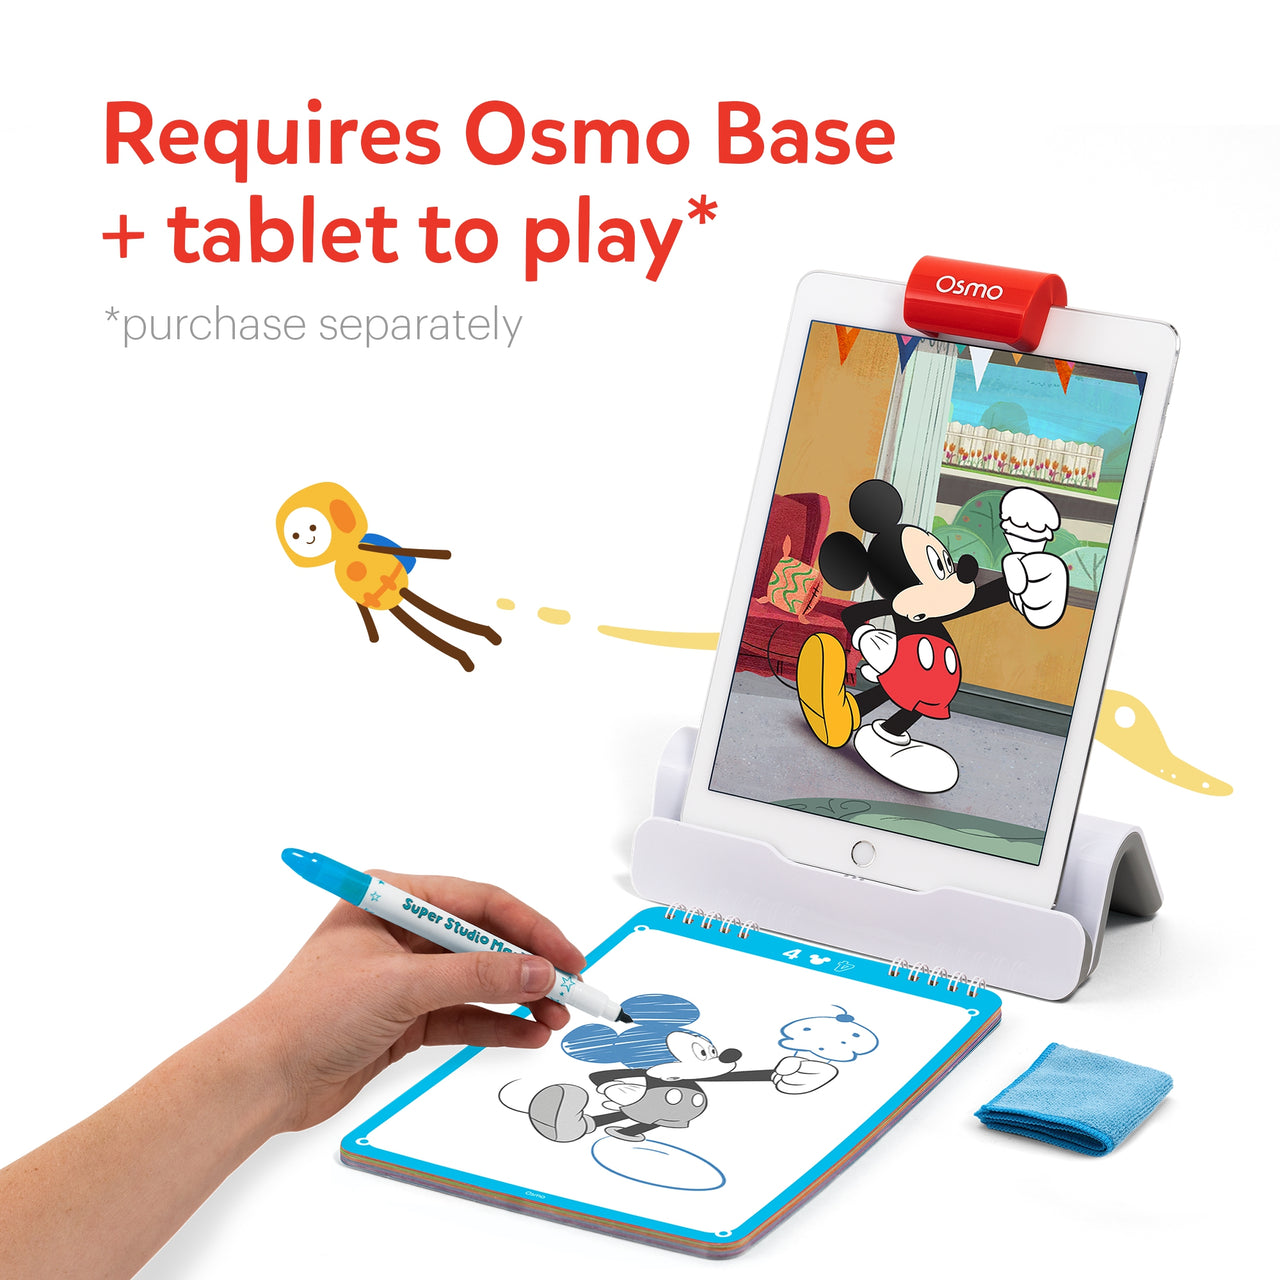 Osmo Super Studio Mickey Mouse & Friends Drawing Game for Ages 5-11